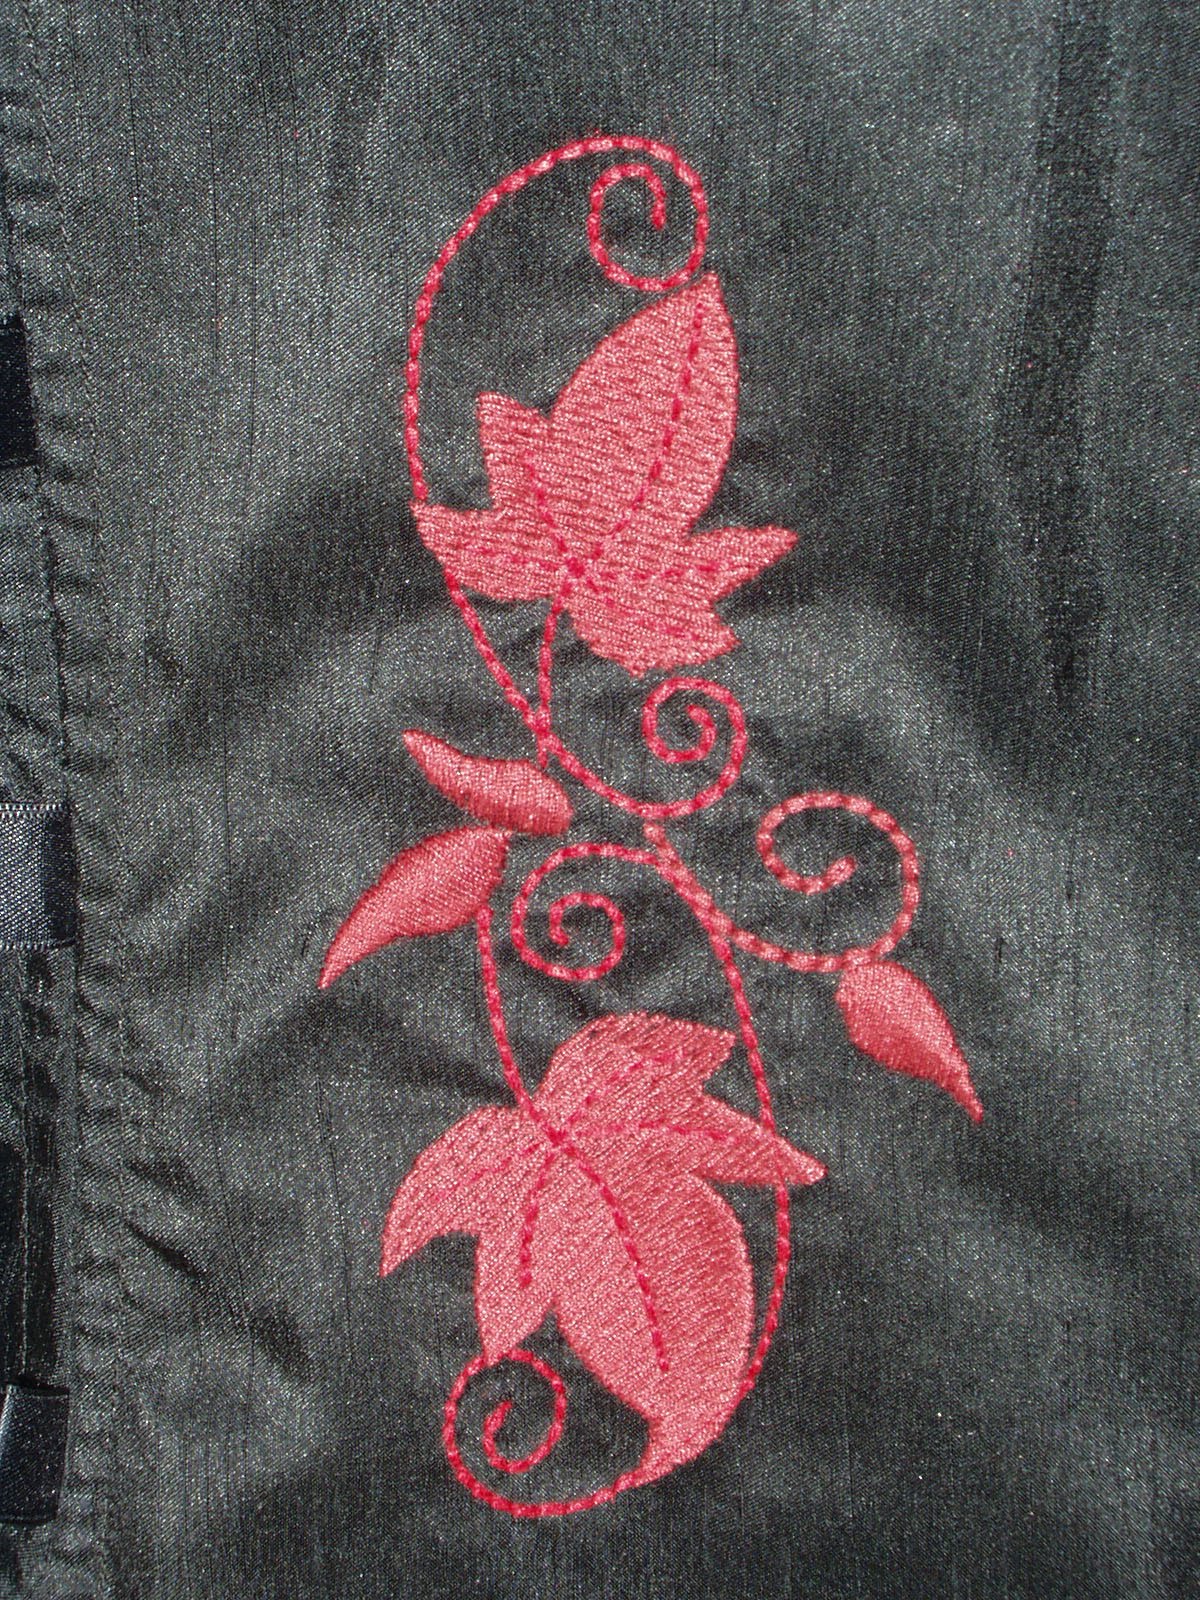 ABC Embroidery - Bug Fabric for your quilting, sewing and